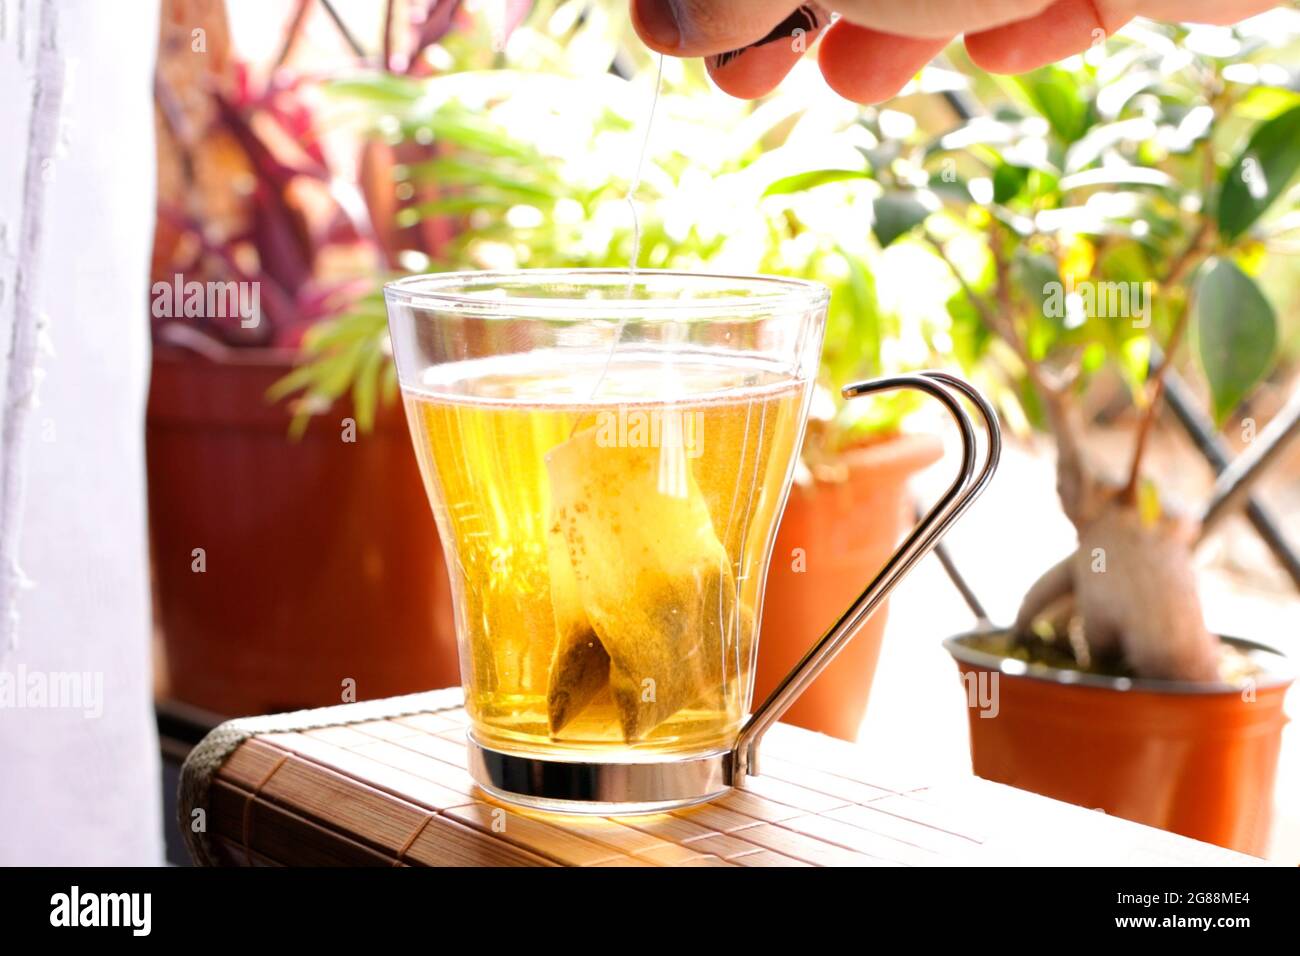 Putting red tea bag into mug with hot water on window with plants Stock Photo